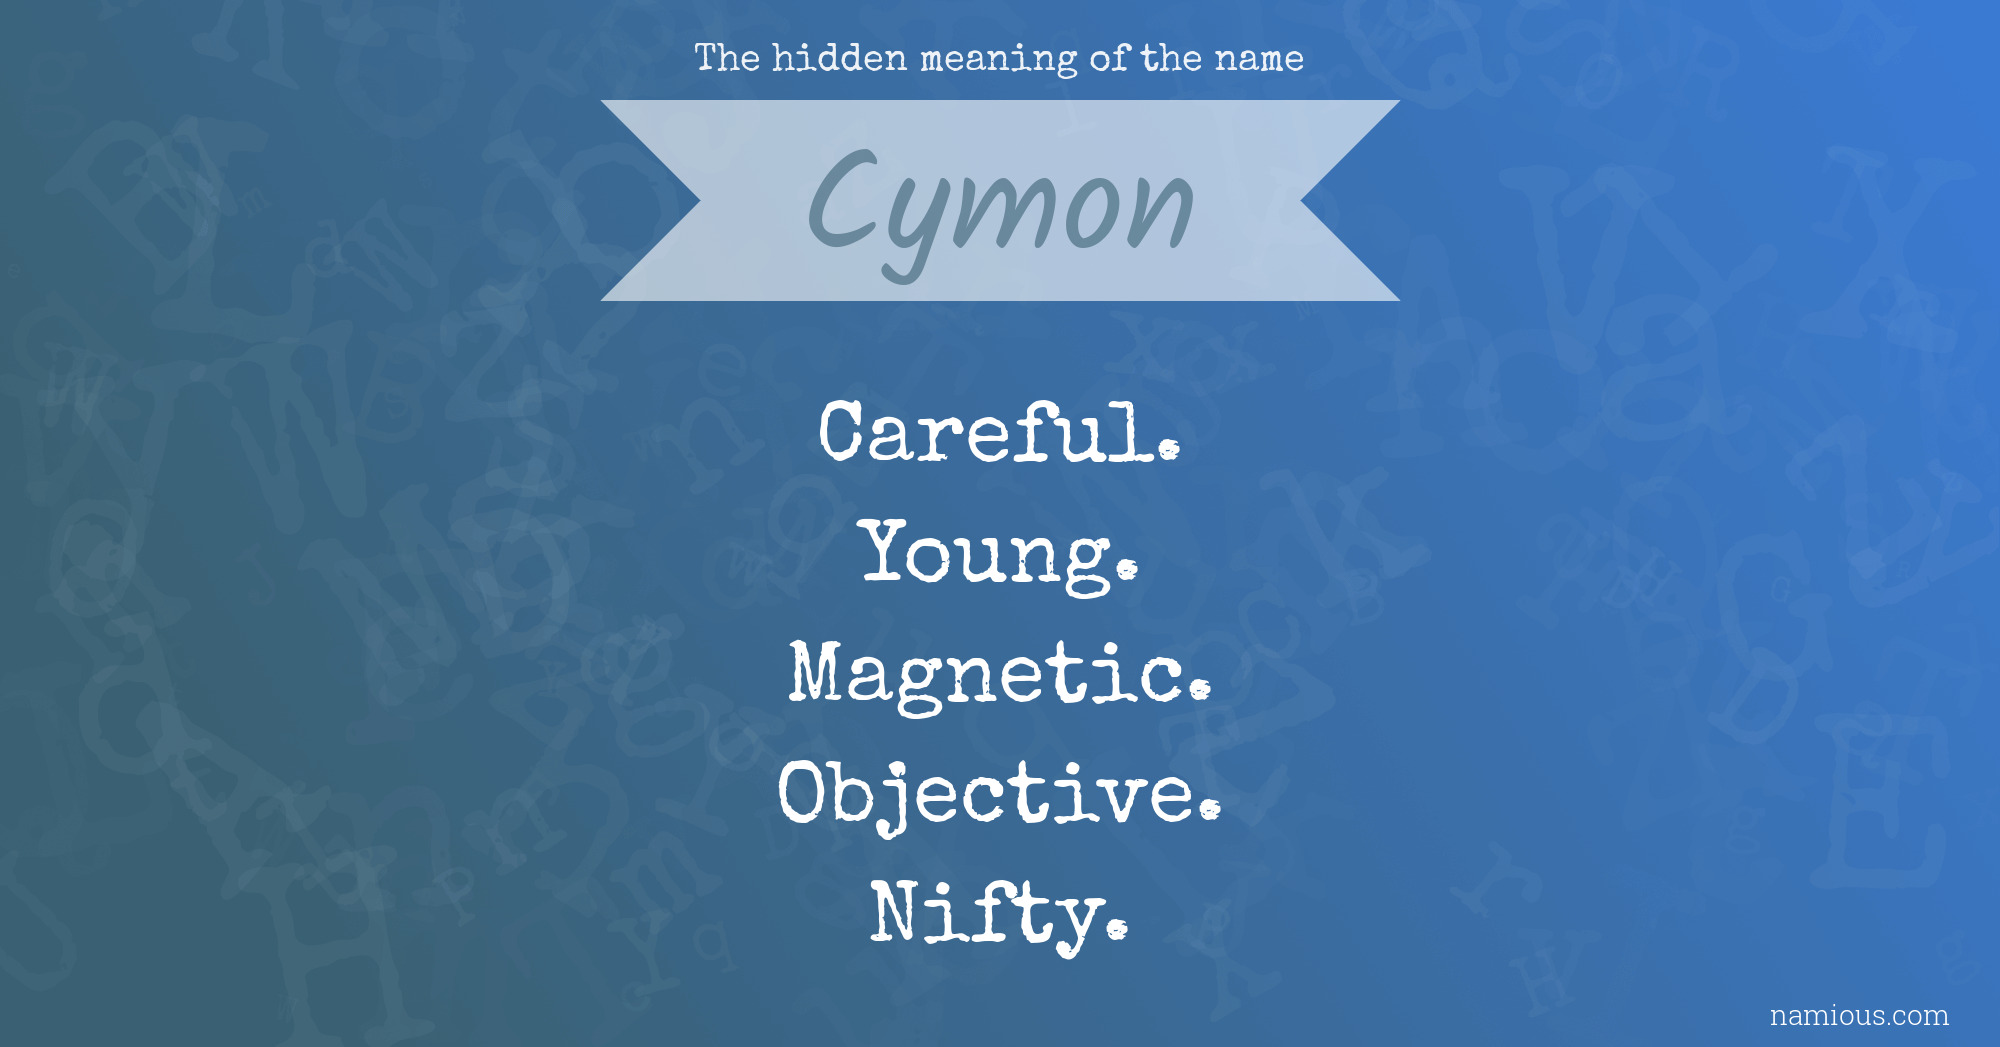 The hidden meaning of the name Cymon